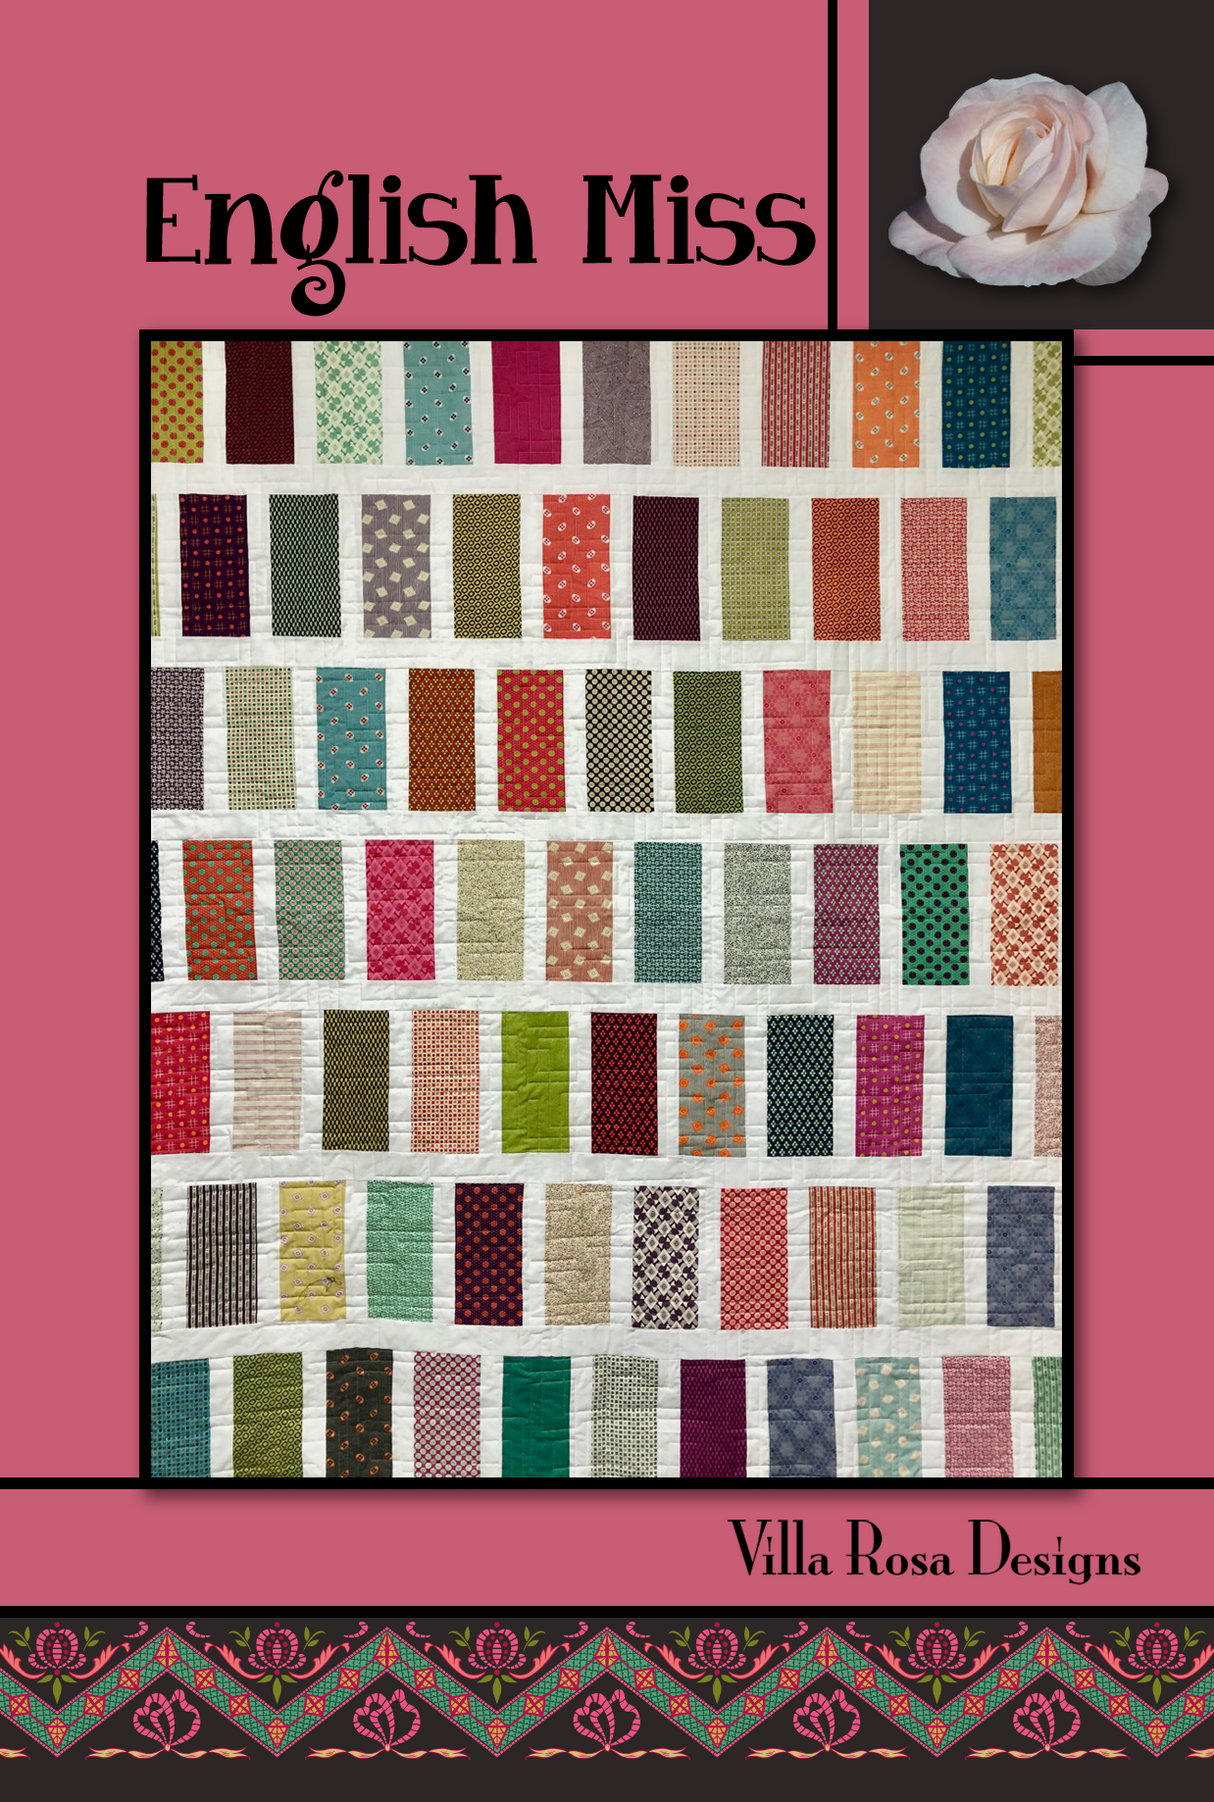 English Miss Downloadable Pattern by Villa Rosa Designs